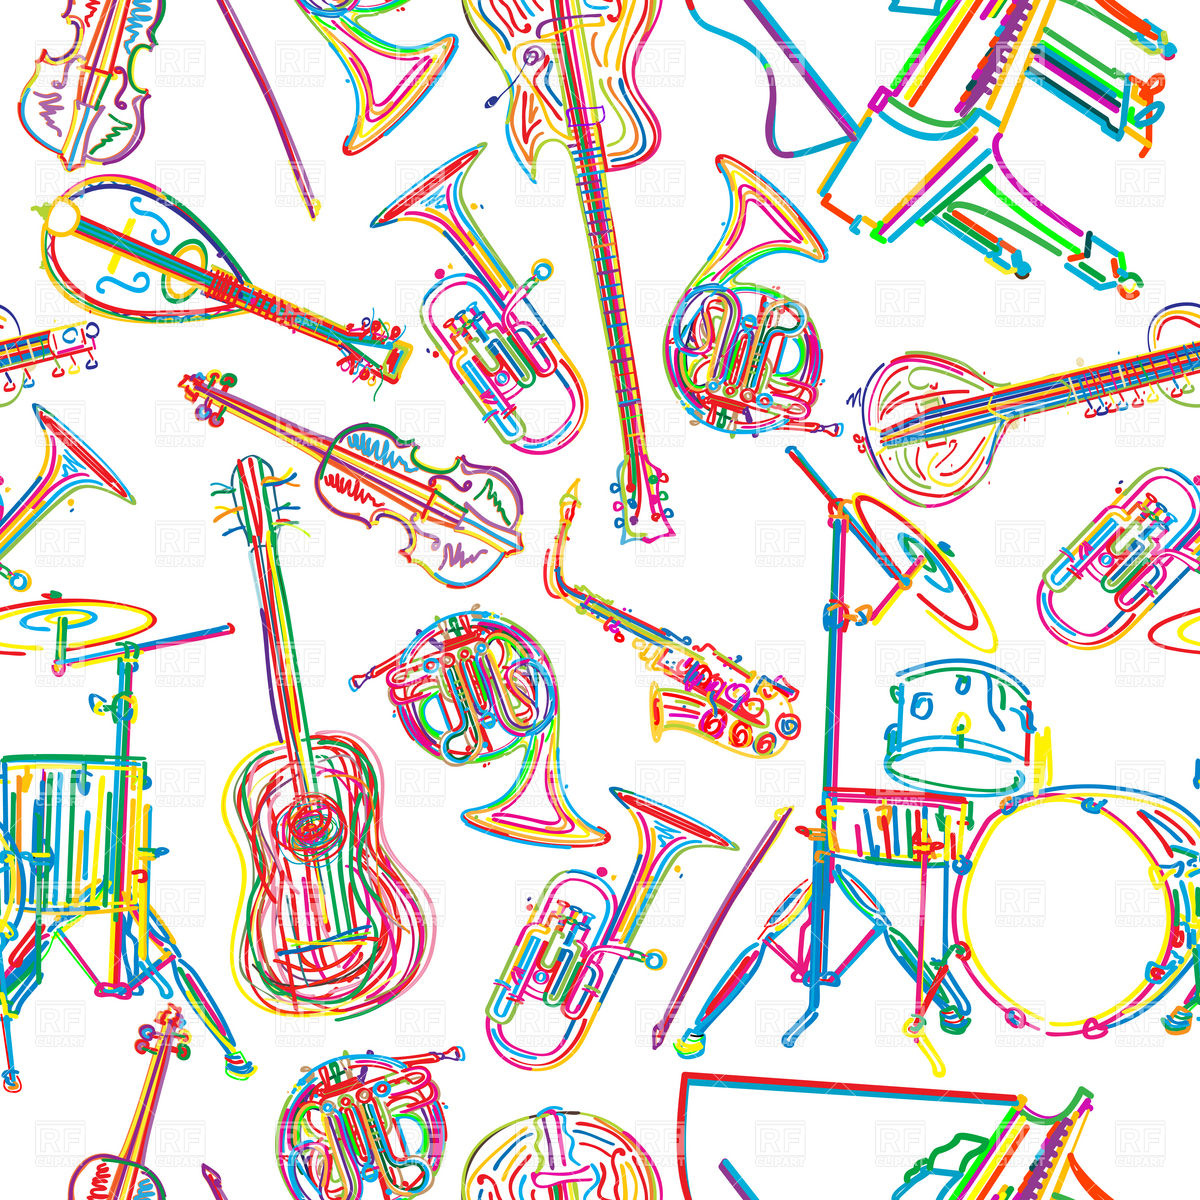 Background With Stylized Musical Instruments Background